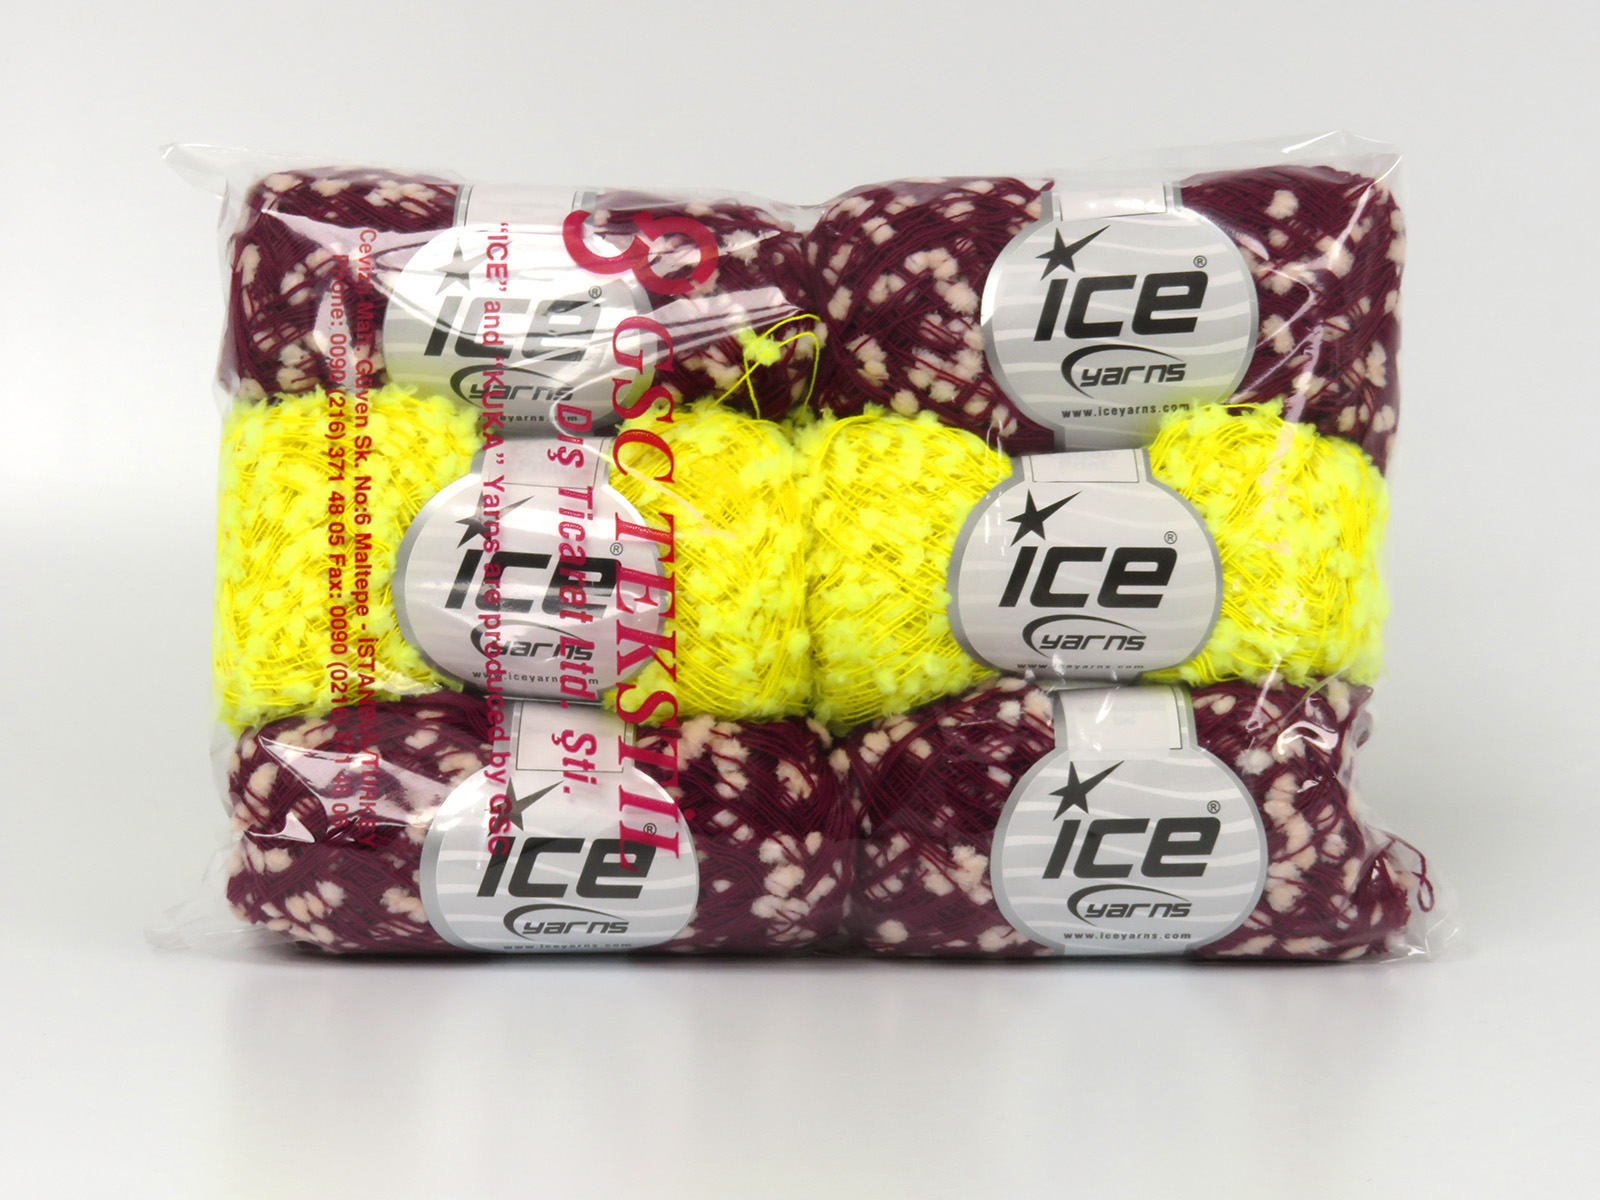 2 Size PomPom Makers . at Ice Yarns Online Yarn Store